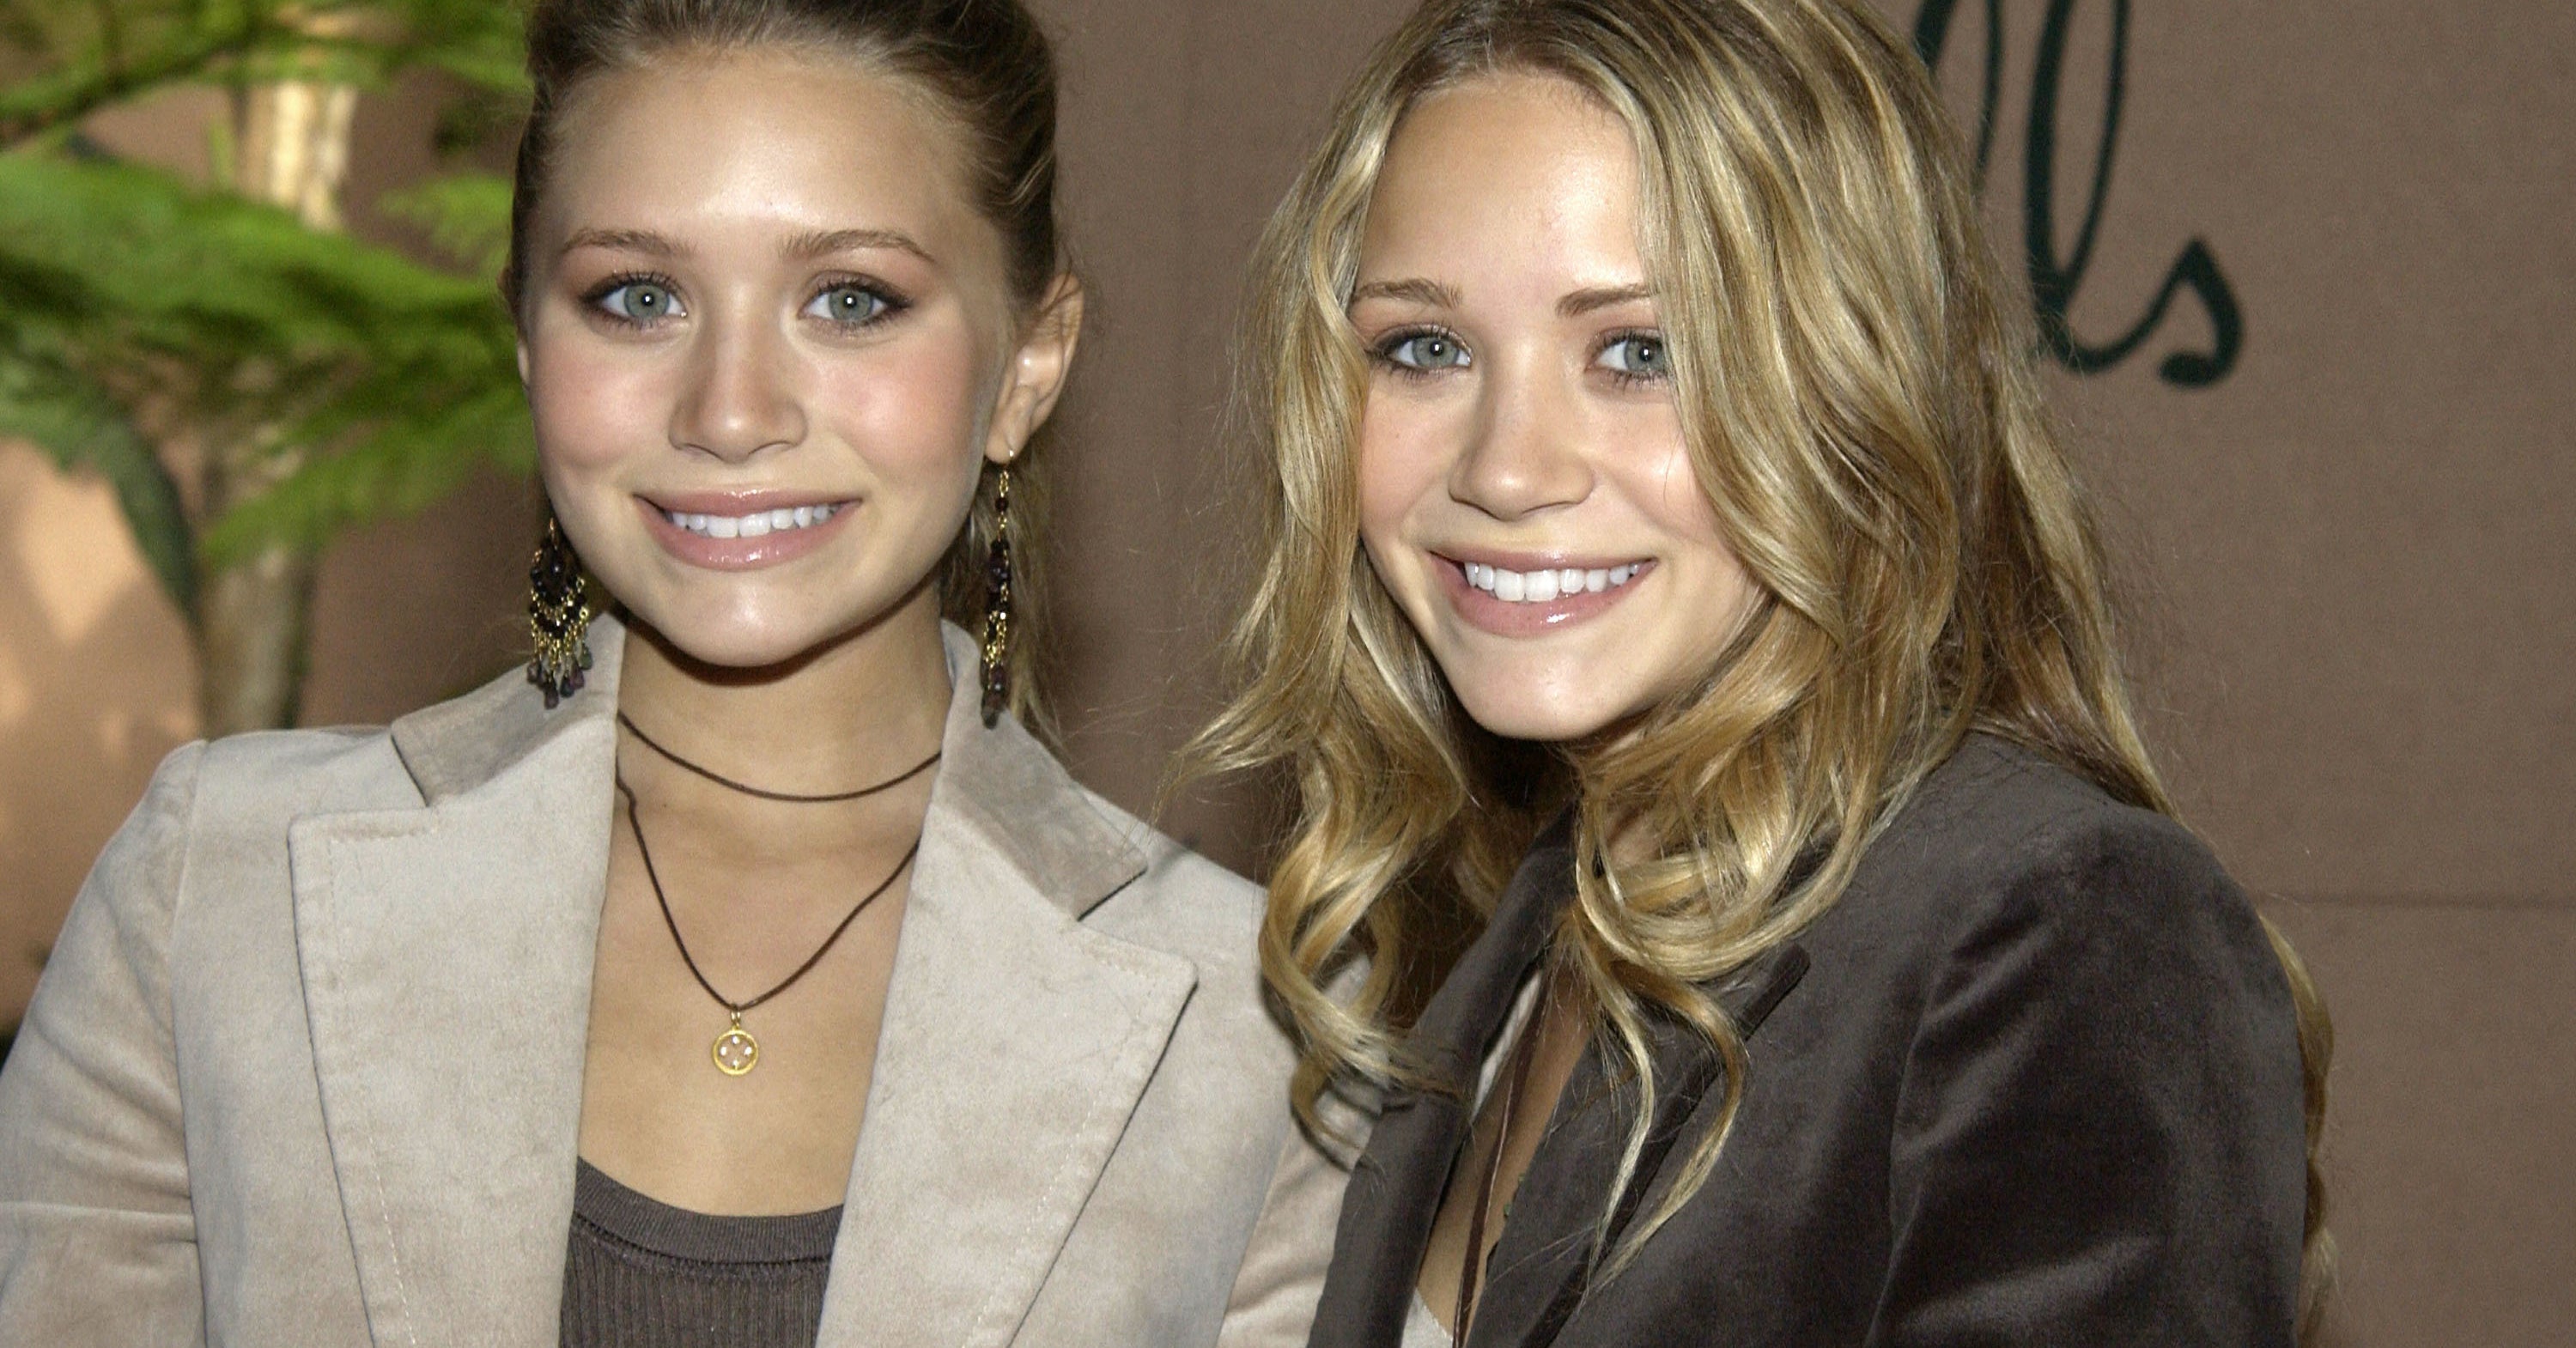 Only A True '00s Girl Can Get Over 5/7 In This Olsen Twins Quiz